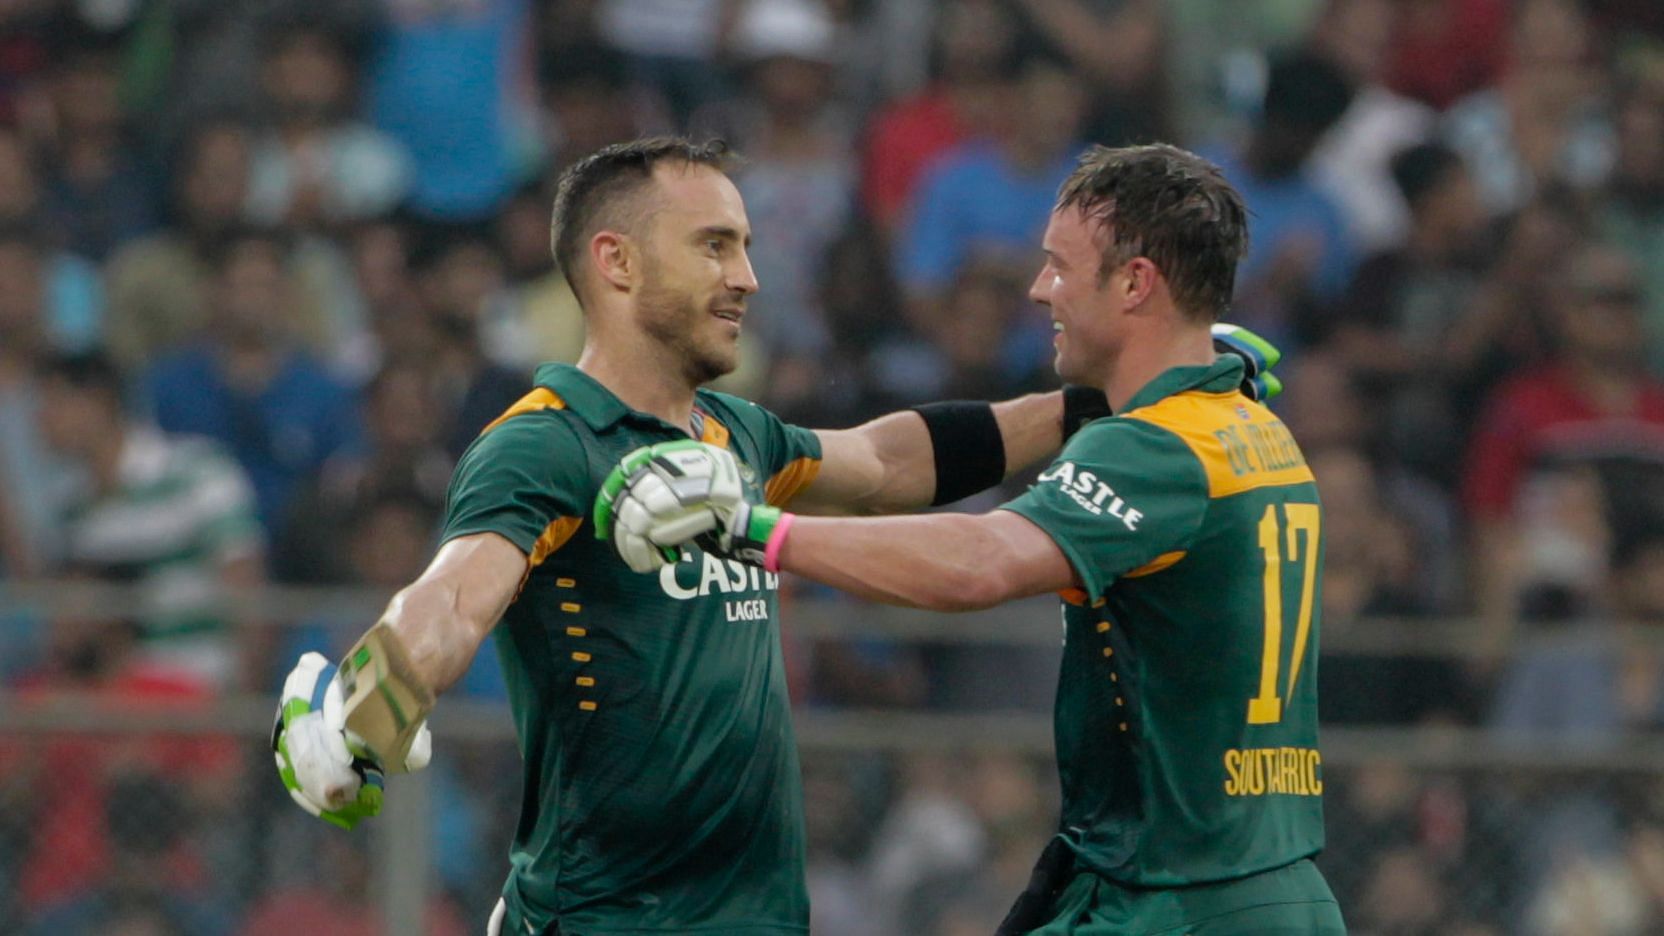 AB de Villiers retired from international cricket after a Test series against Australia in 2017.